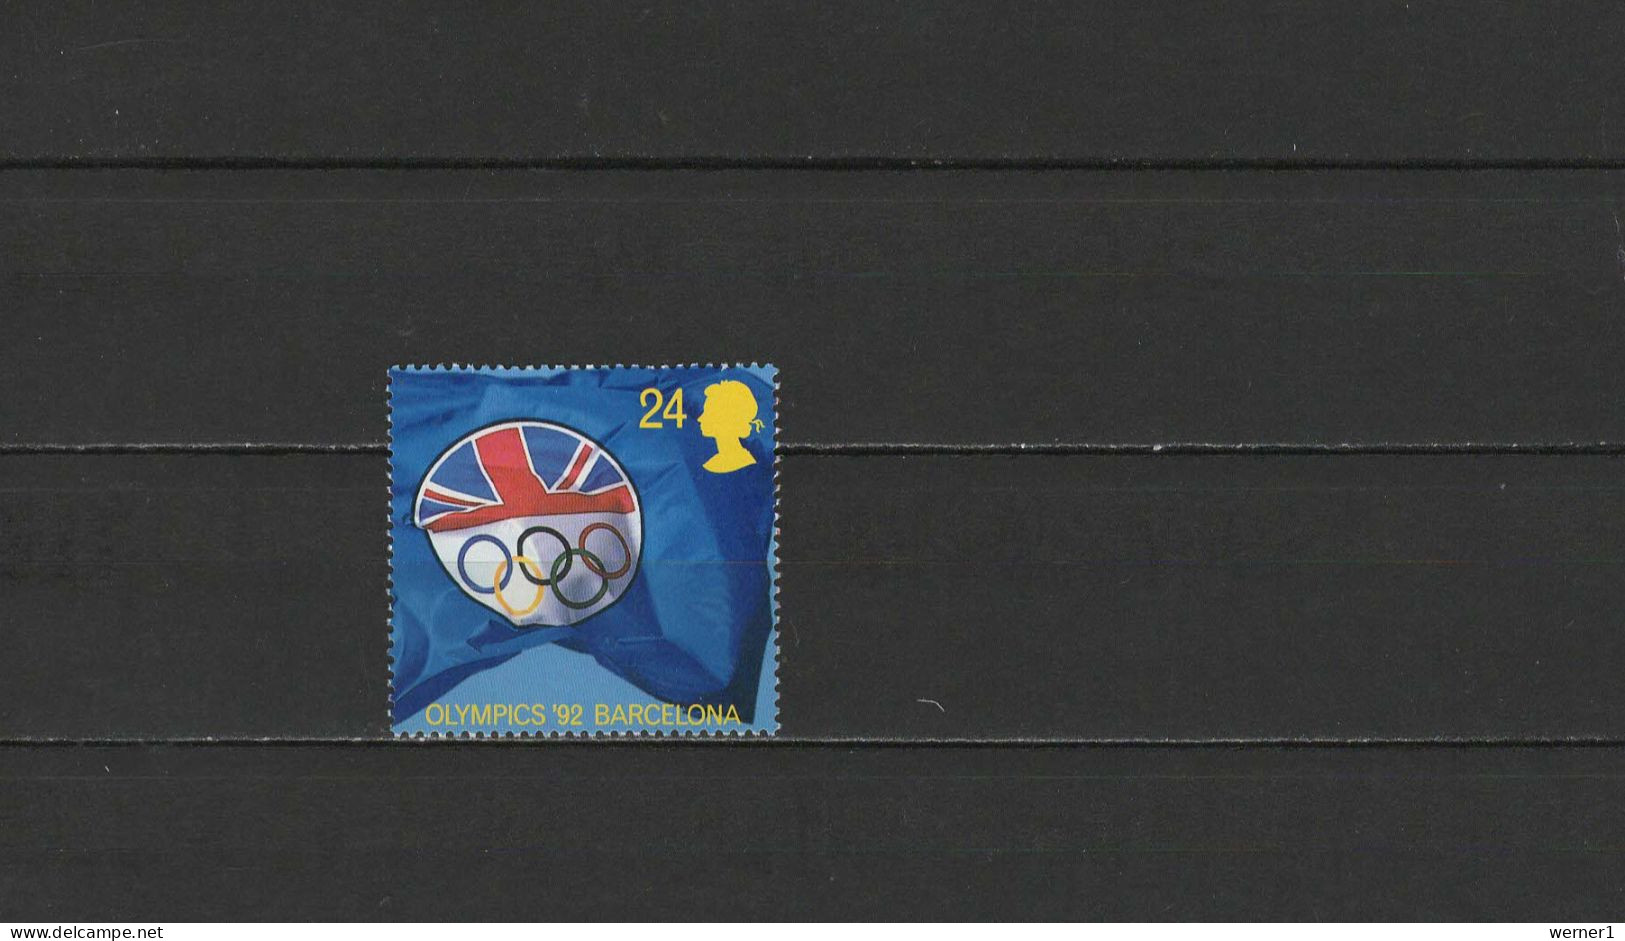 UK Great Britain England 1992 Olympic Games Barcelona Stamp MNH - Sommer 1992: Barcelone